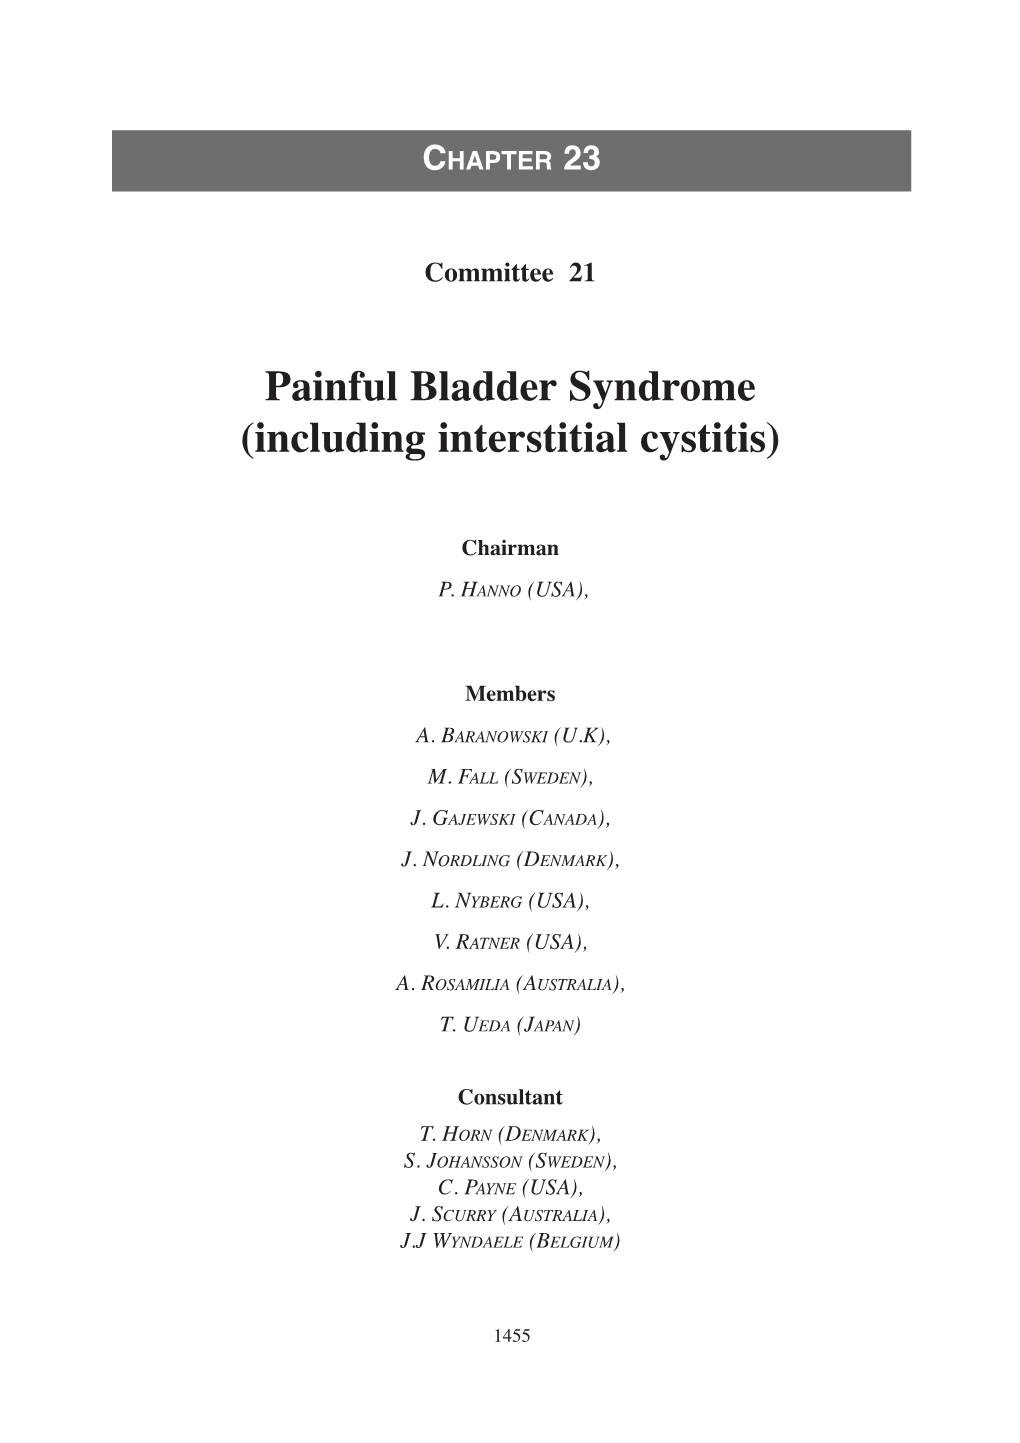 Painful Bladder Syndrome (Including Interstitial Cystitis)